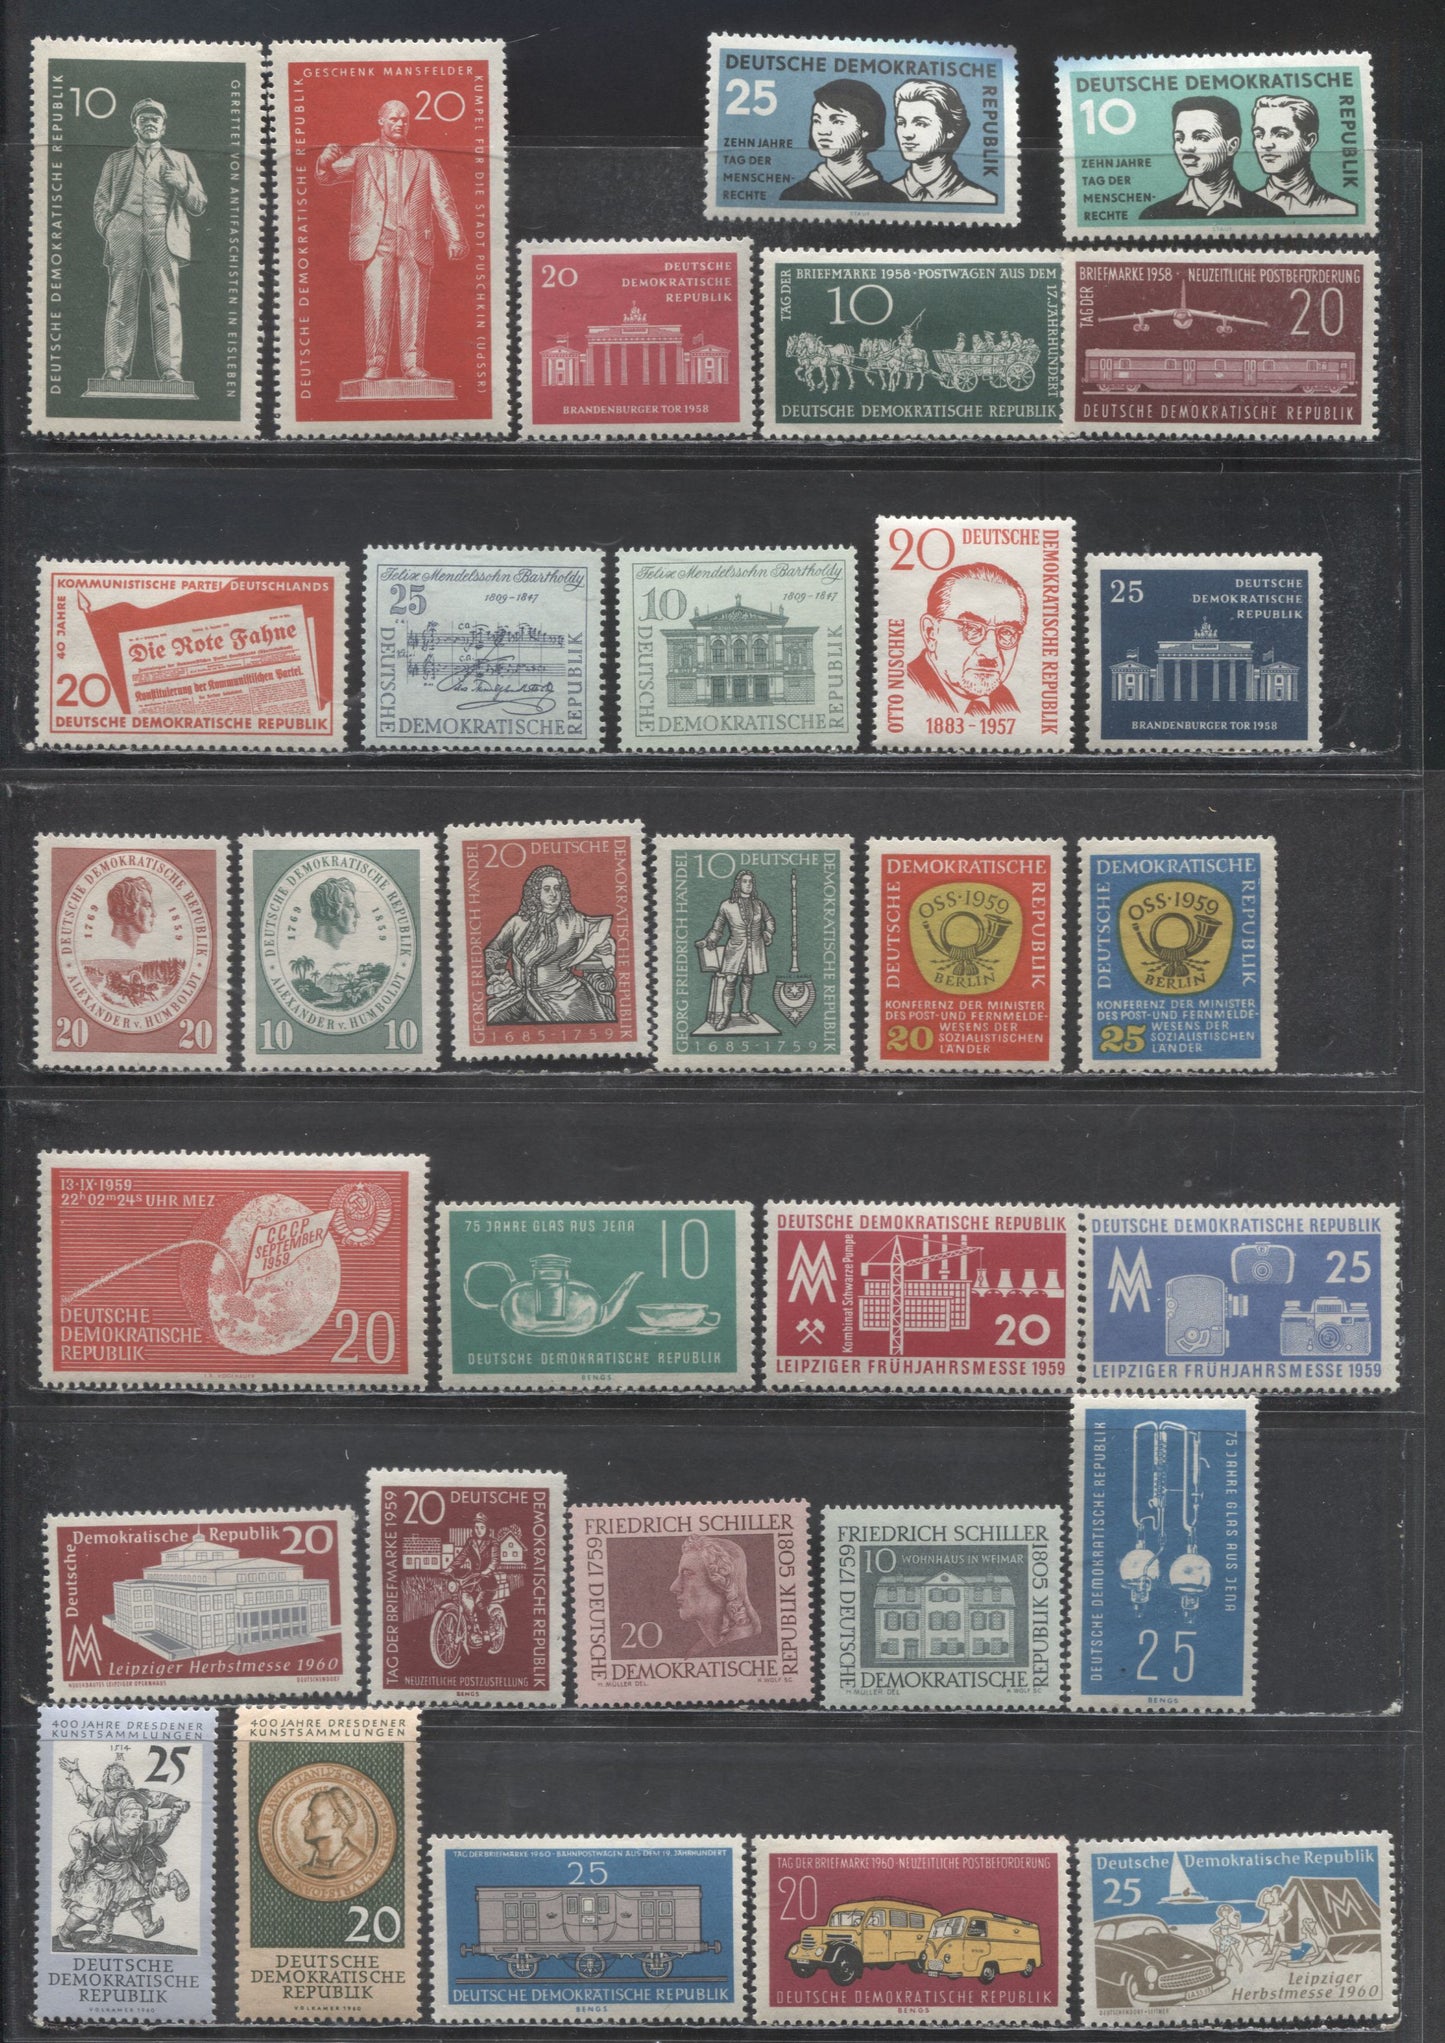 Lot 68 German Democratic Republic SC#414/517 1958-1960 10th Anniversary Of Universal Declaration Of Human Rights - 400th Anniversary Of Dresden Art Gallery Issues, 32 VFOG & NH Singles, Click on Listing to See ALL Pictures, Estimated Value $15